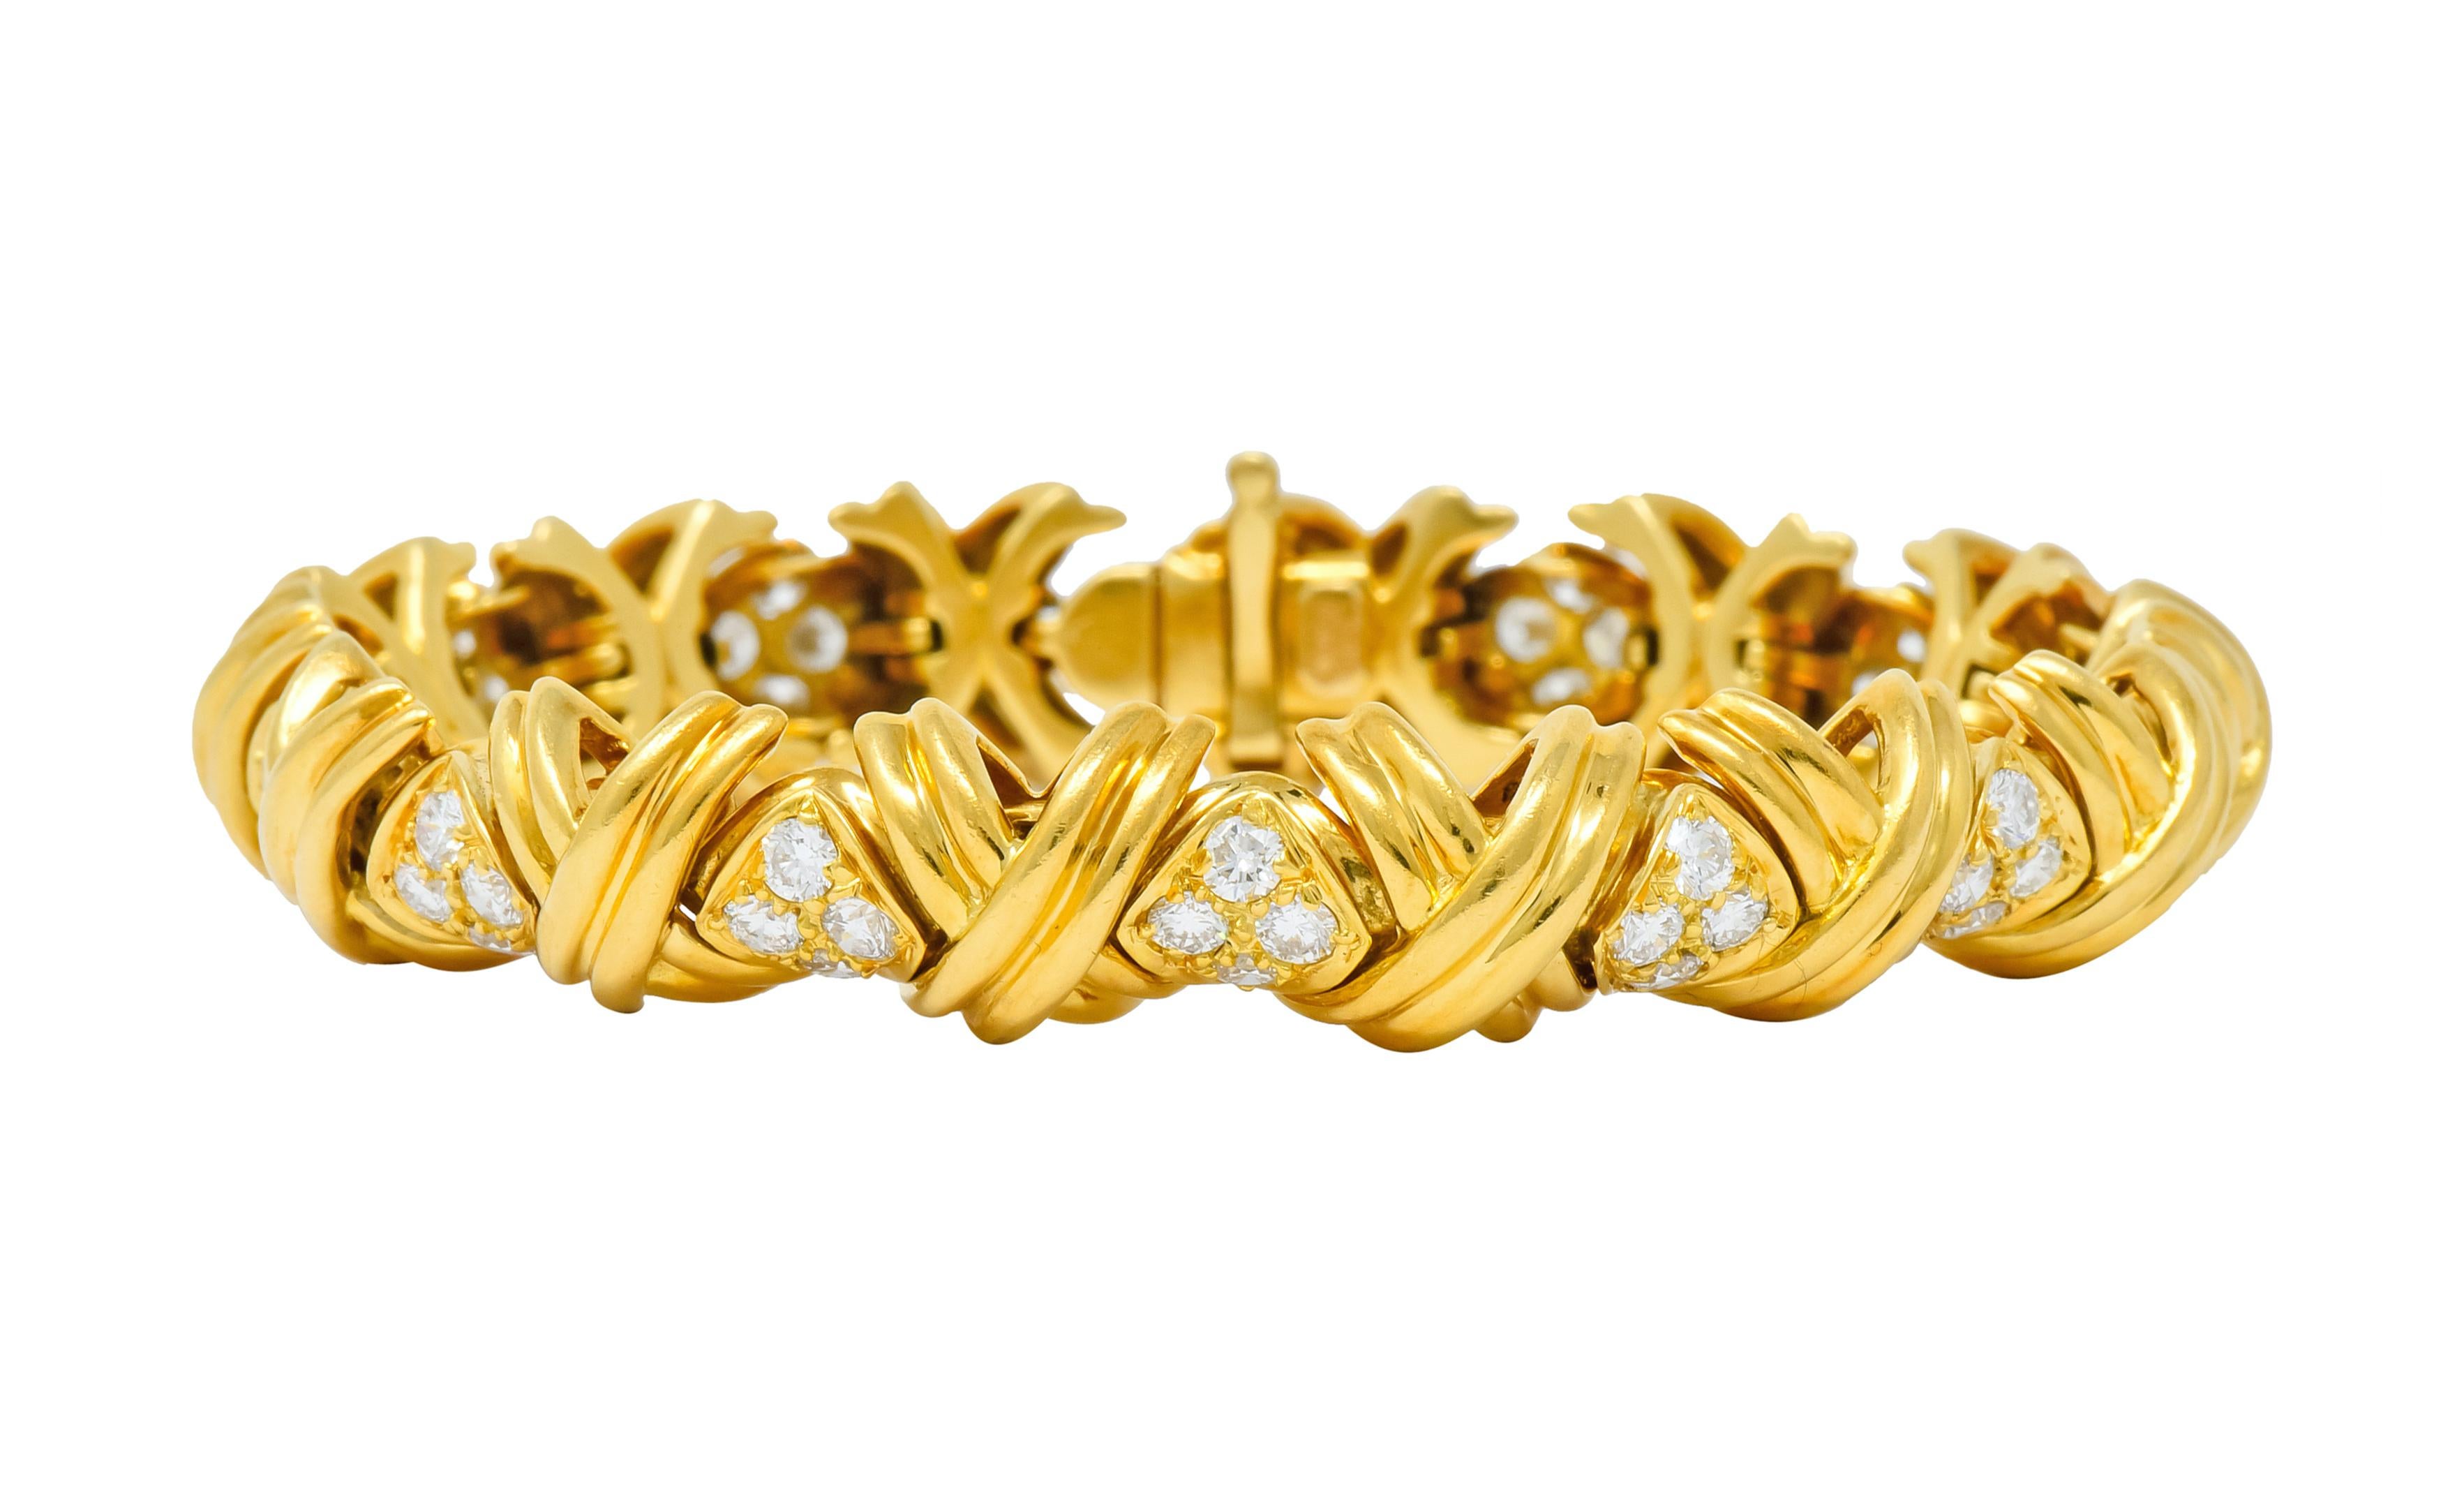 Link style bracelet comprised of deeply grooved X links

Alternating with navette spacer links pavé set with round brilliant cut diamonds weighing approximately 3.92 carats total, G/H color and VS clarity

Completed by concealed clasp with hinged